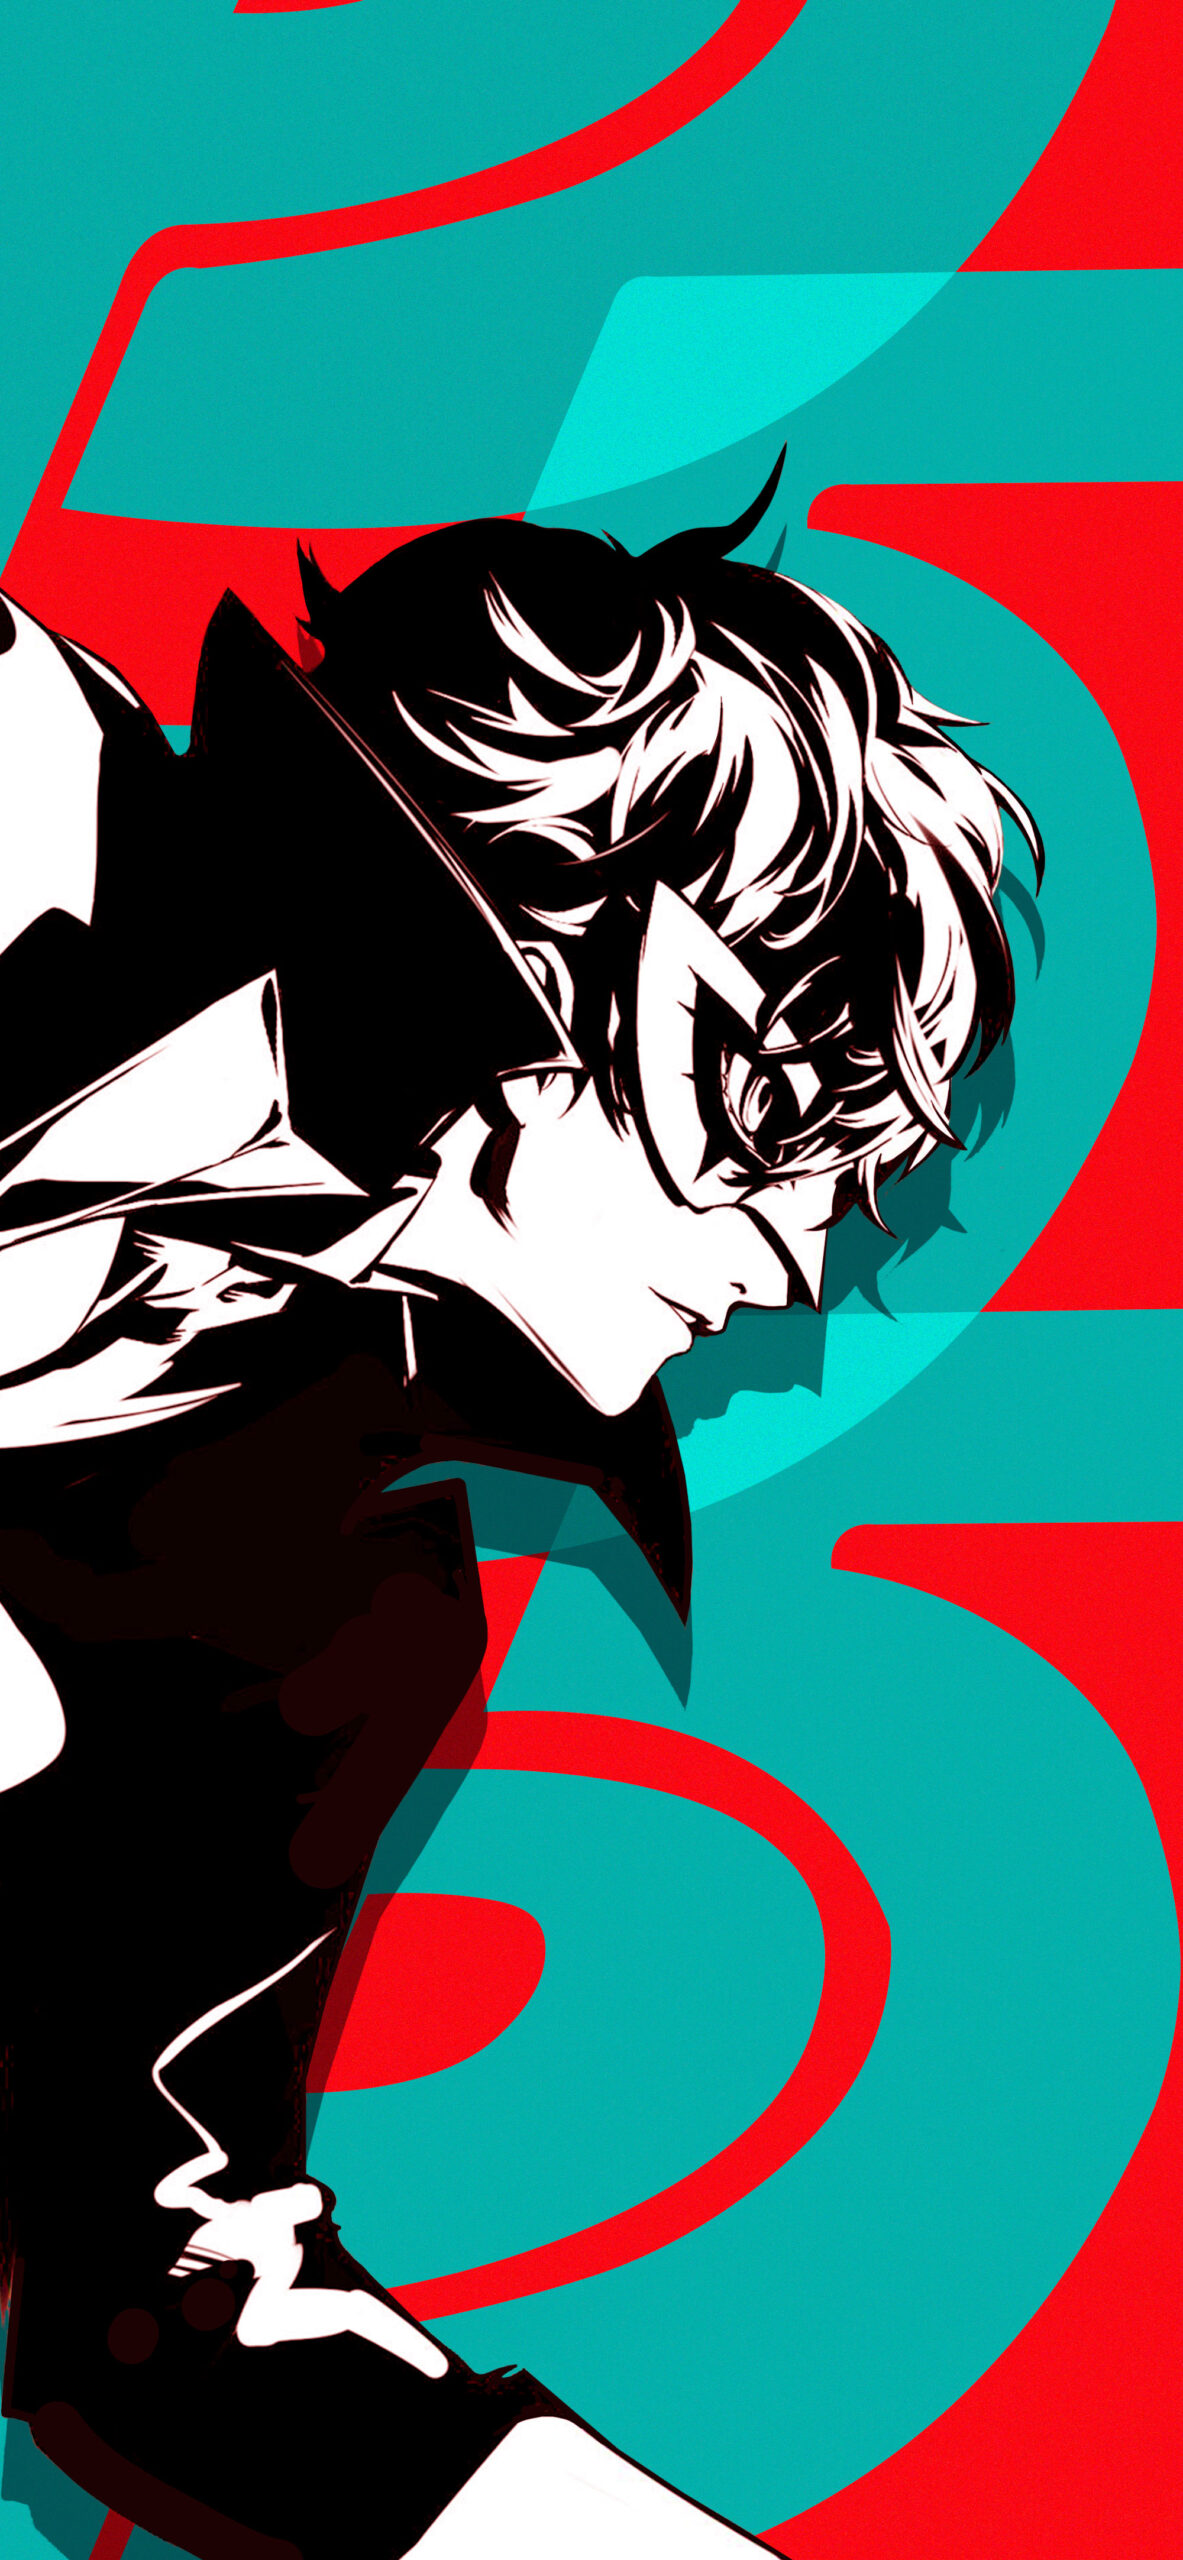 Persona 5 Joker Wallpapers for Phone - Aesthetic Anime Wallpapers